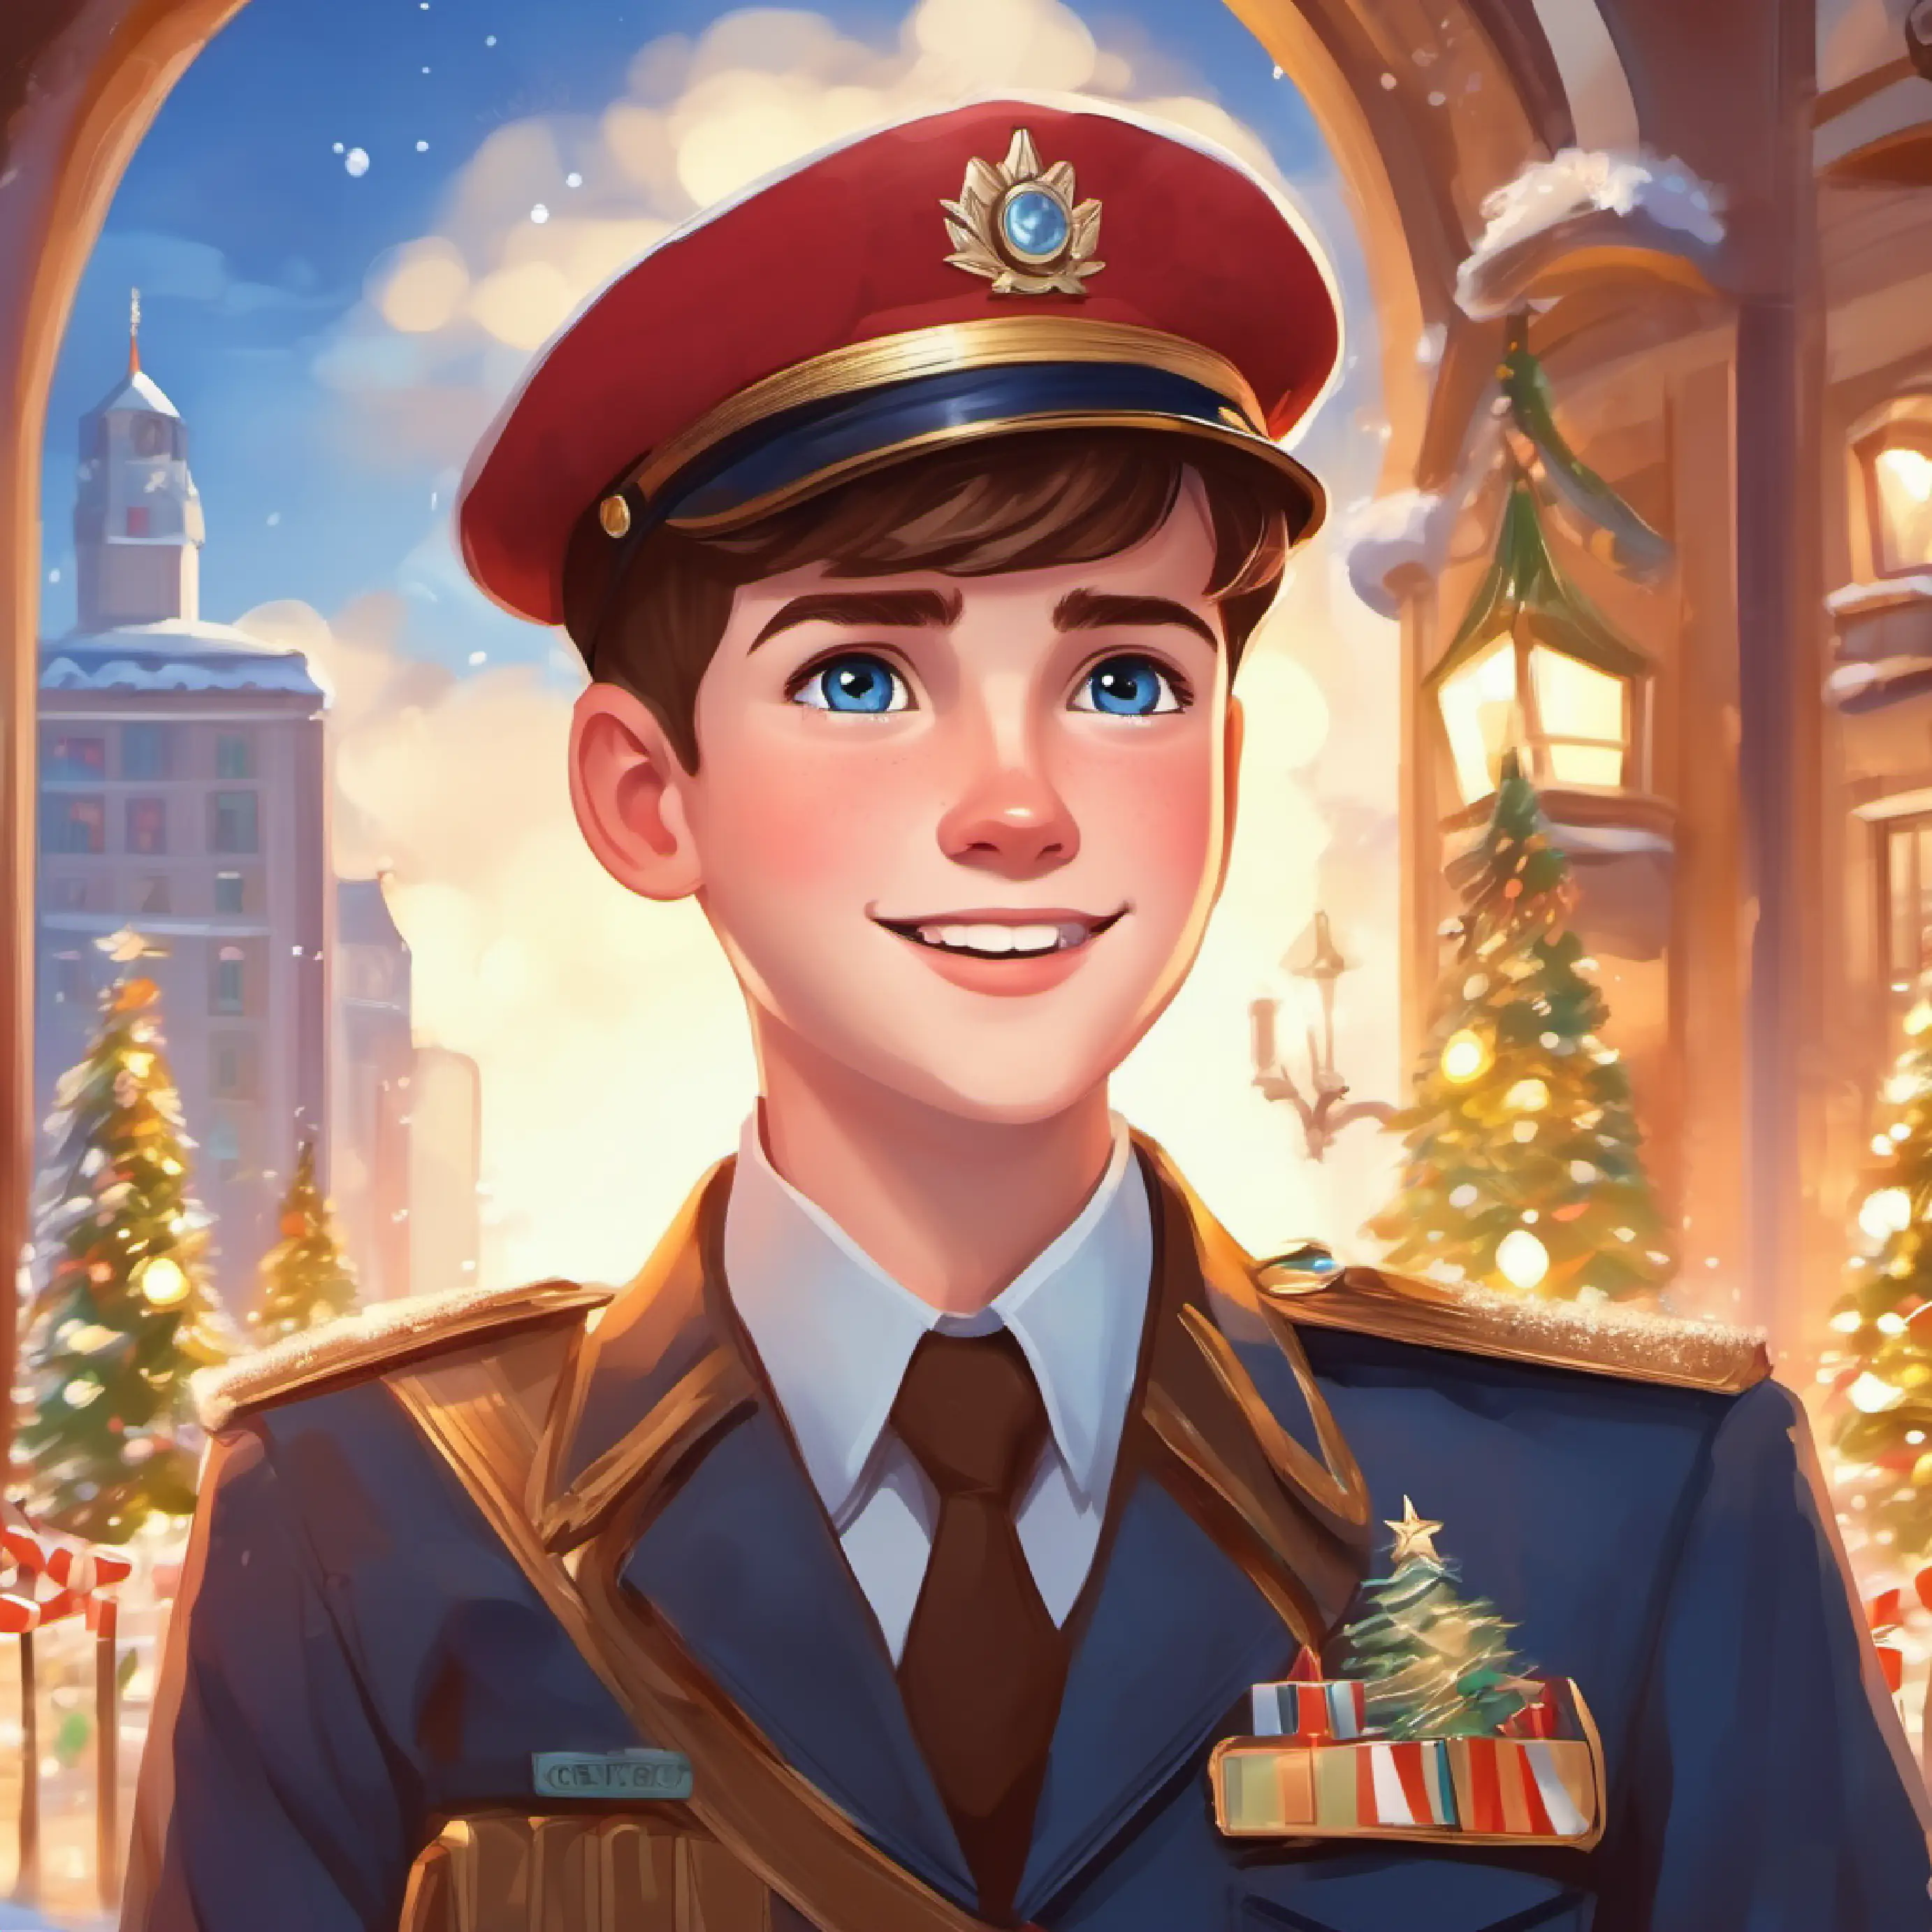 Cheerful boy, short brown hair, sparkling blue eyes's role as Morale Officer, his love for the job